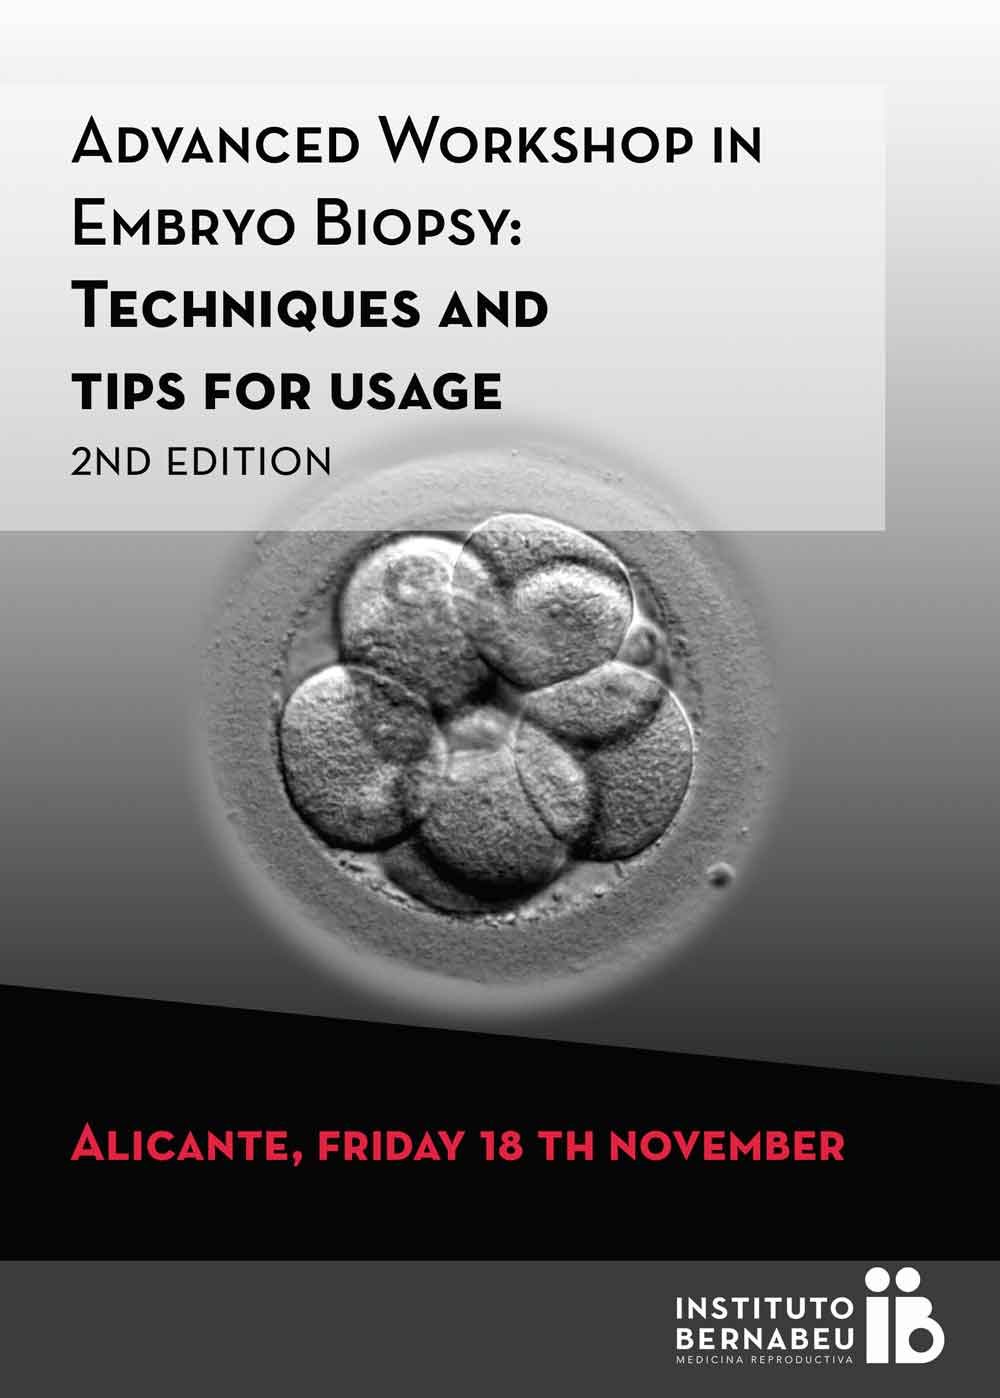 Advanced Workshop in Embryo Biopsy: Techniques and tips for usage (2nd Edition)